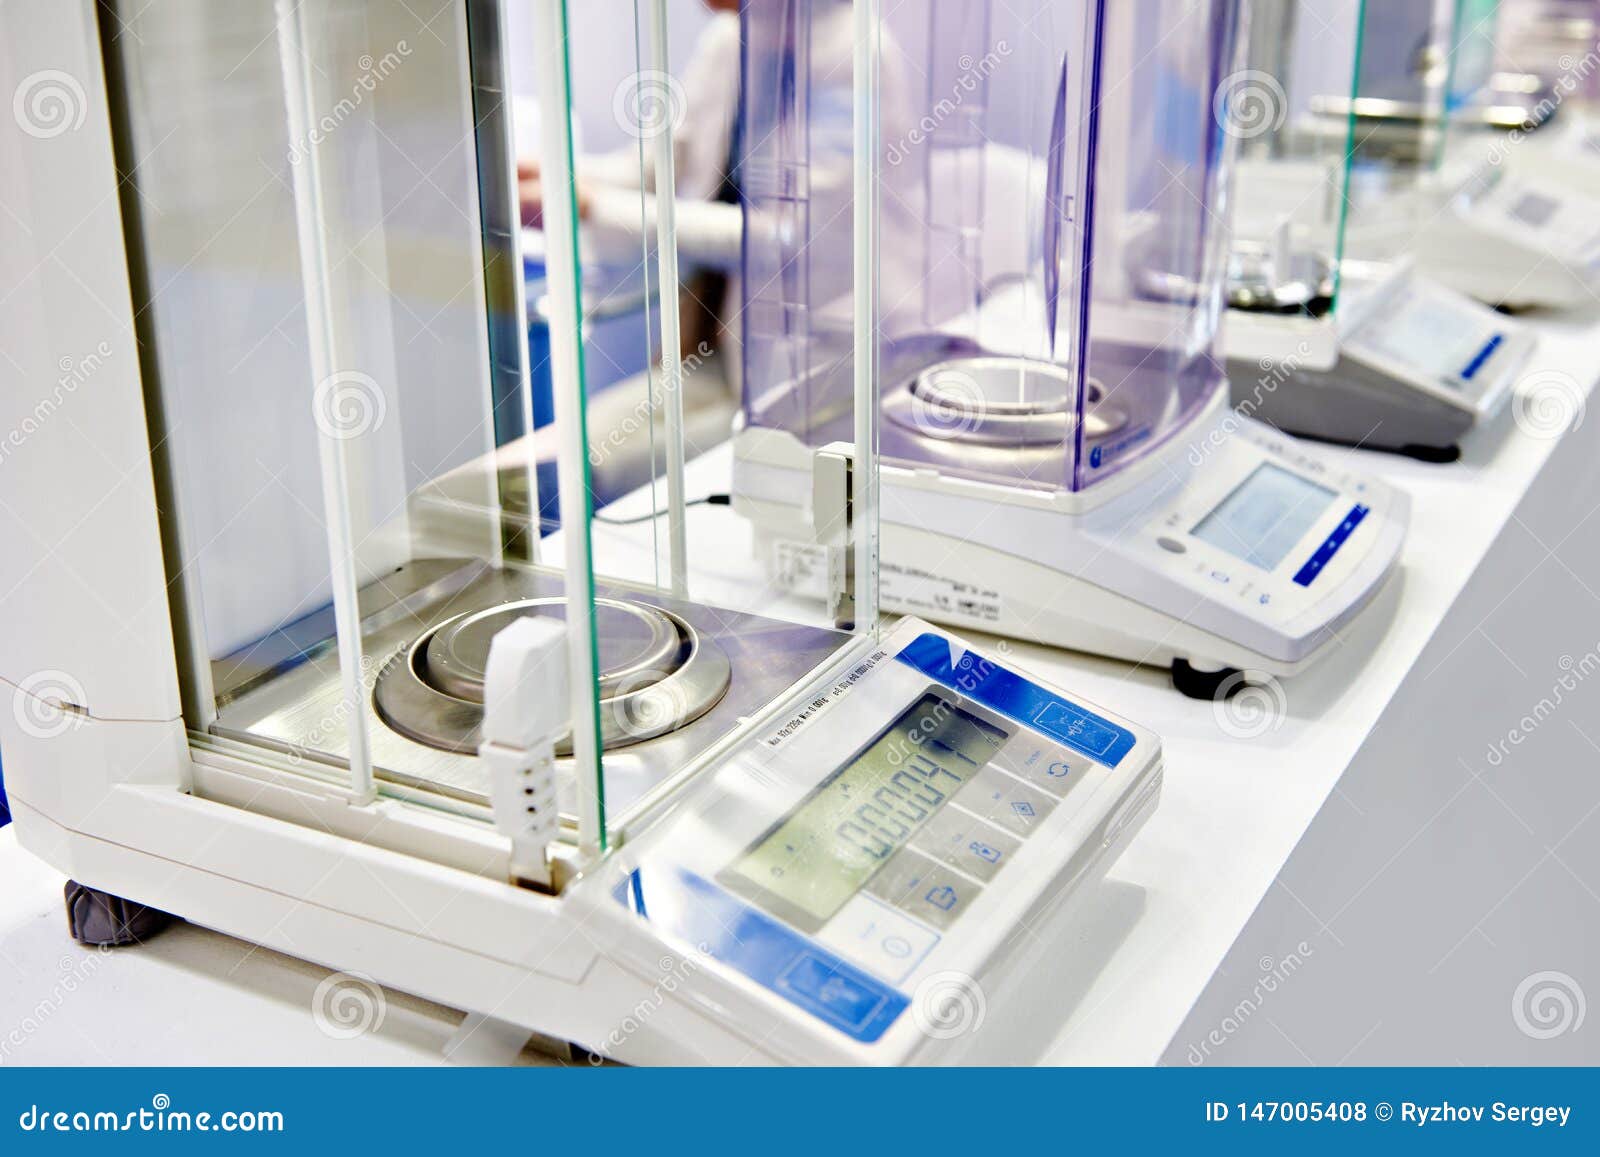 https://thumbs.dreamstime.com/z/digital-analytical-balance-scale-exhibition-147005408.jpg